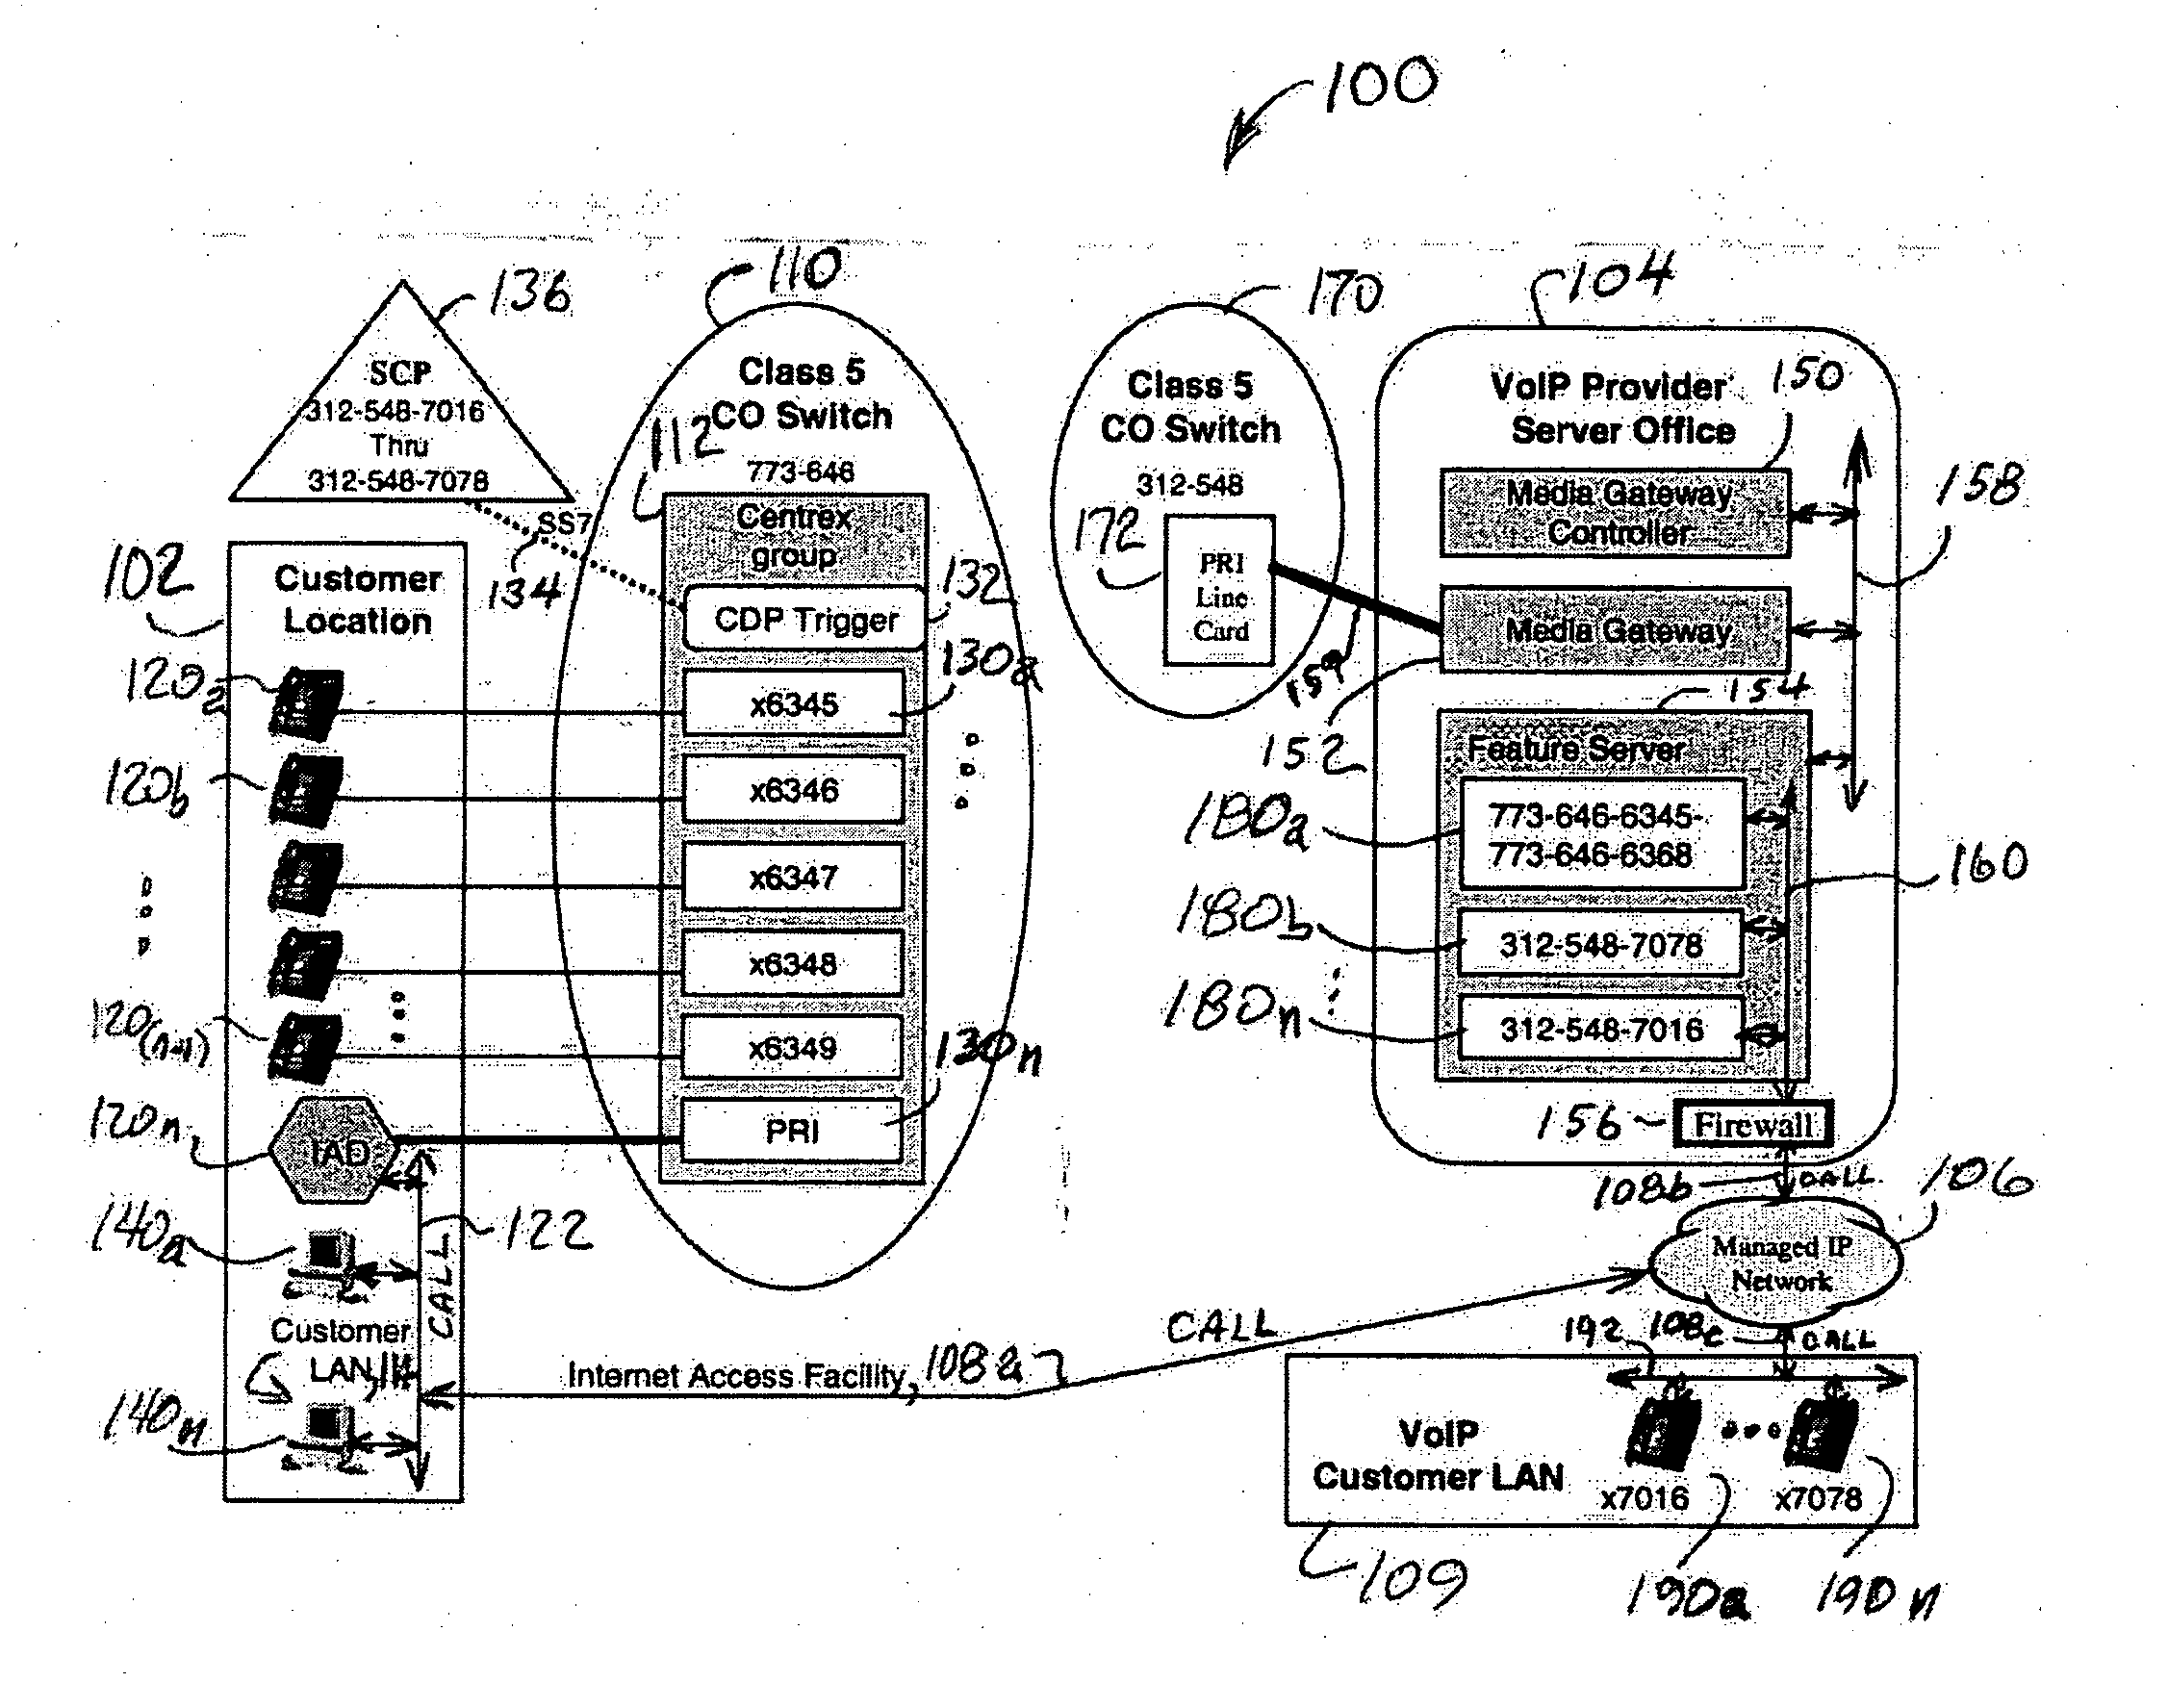 System and method for inter-working centrex with a managed VoIP provider